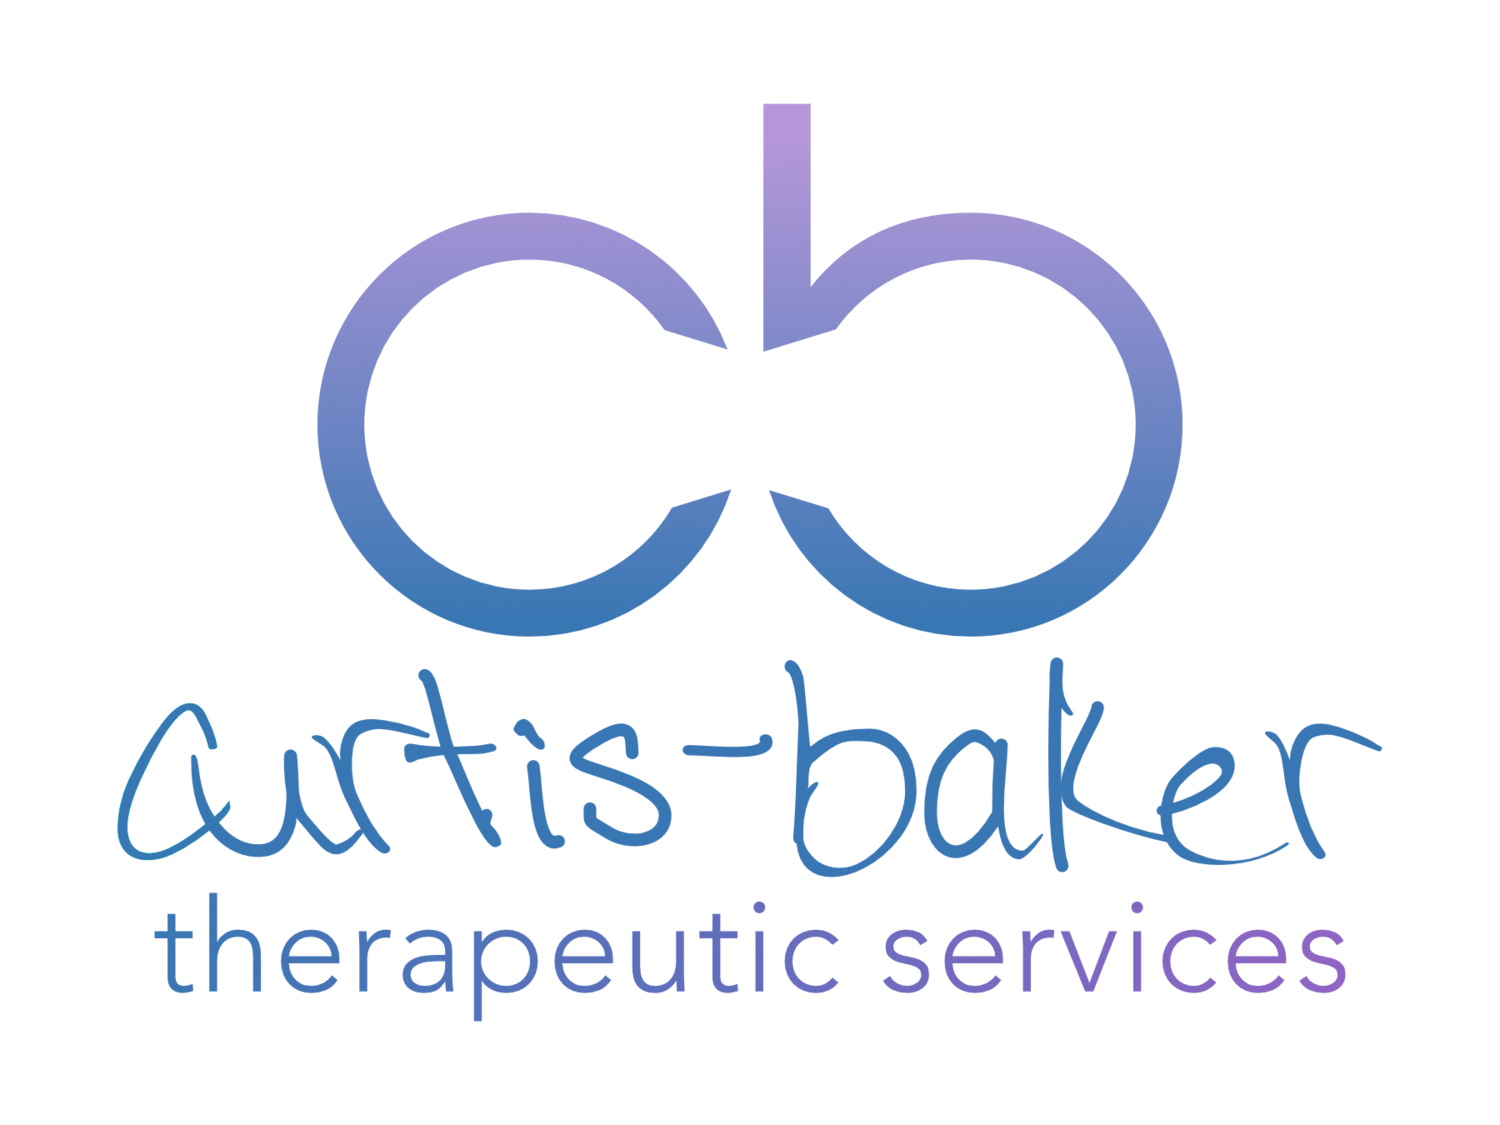 Curtis-Baker Therapeutic Services